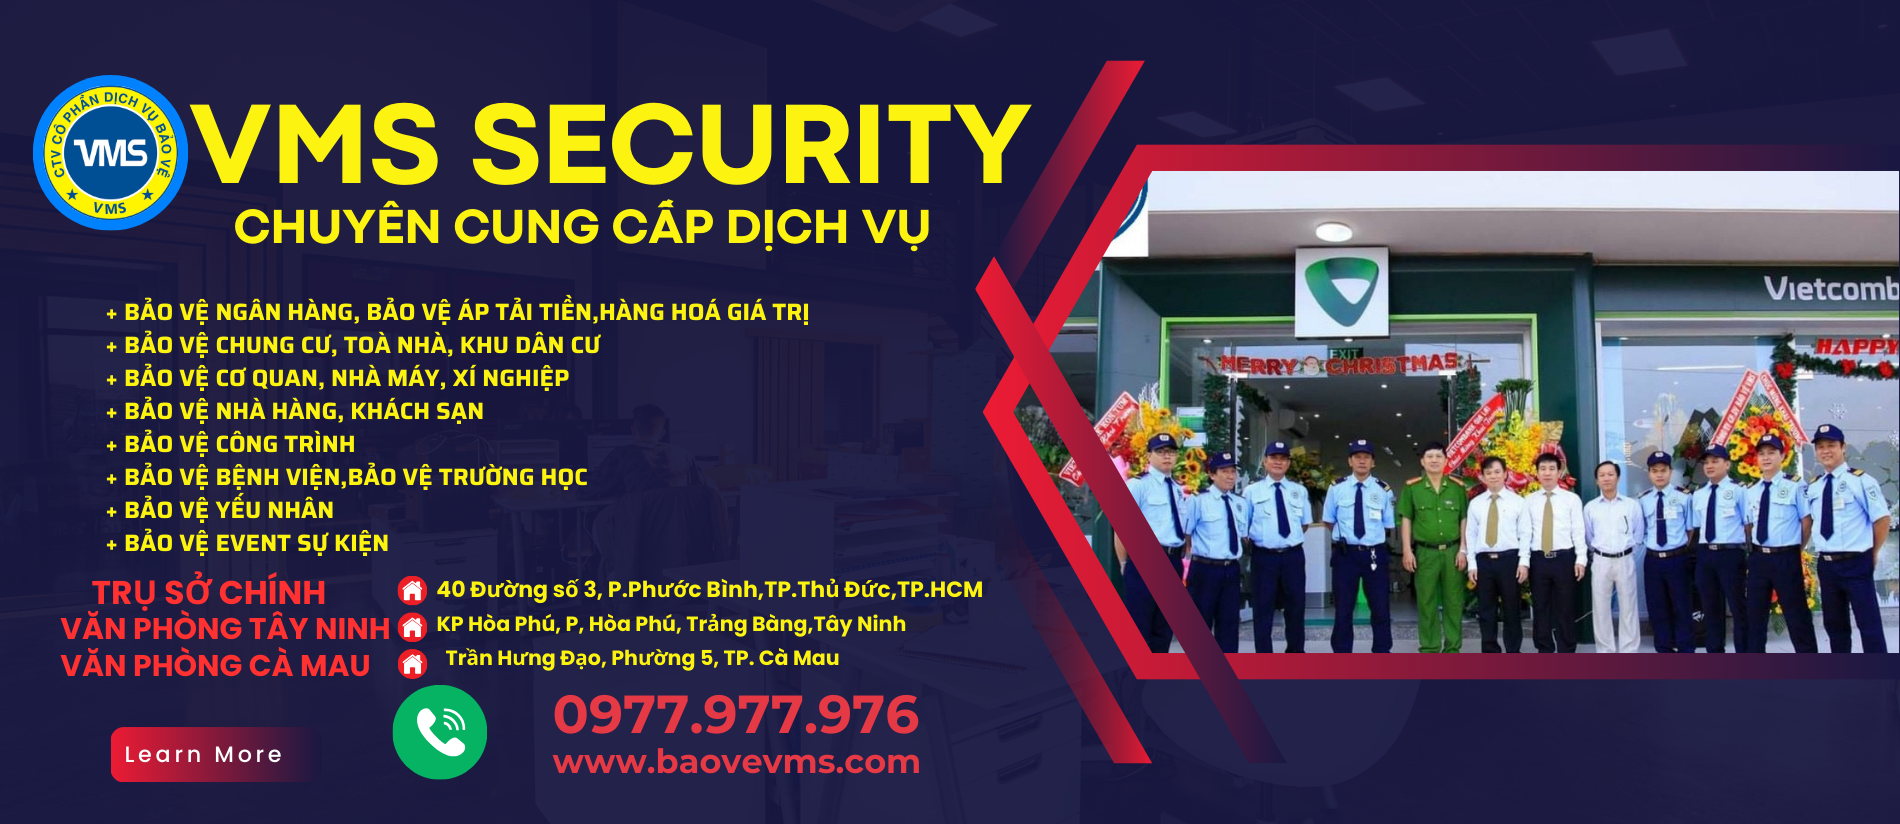 vms security (1900 x 824 px)2 new_-29-05-2024-13-40-14.png